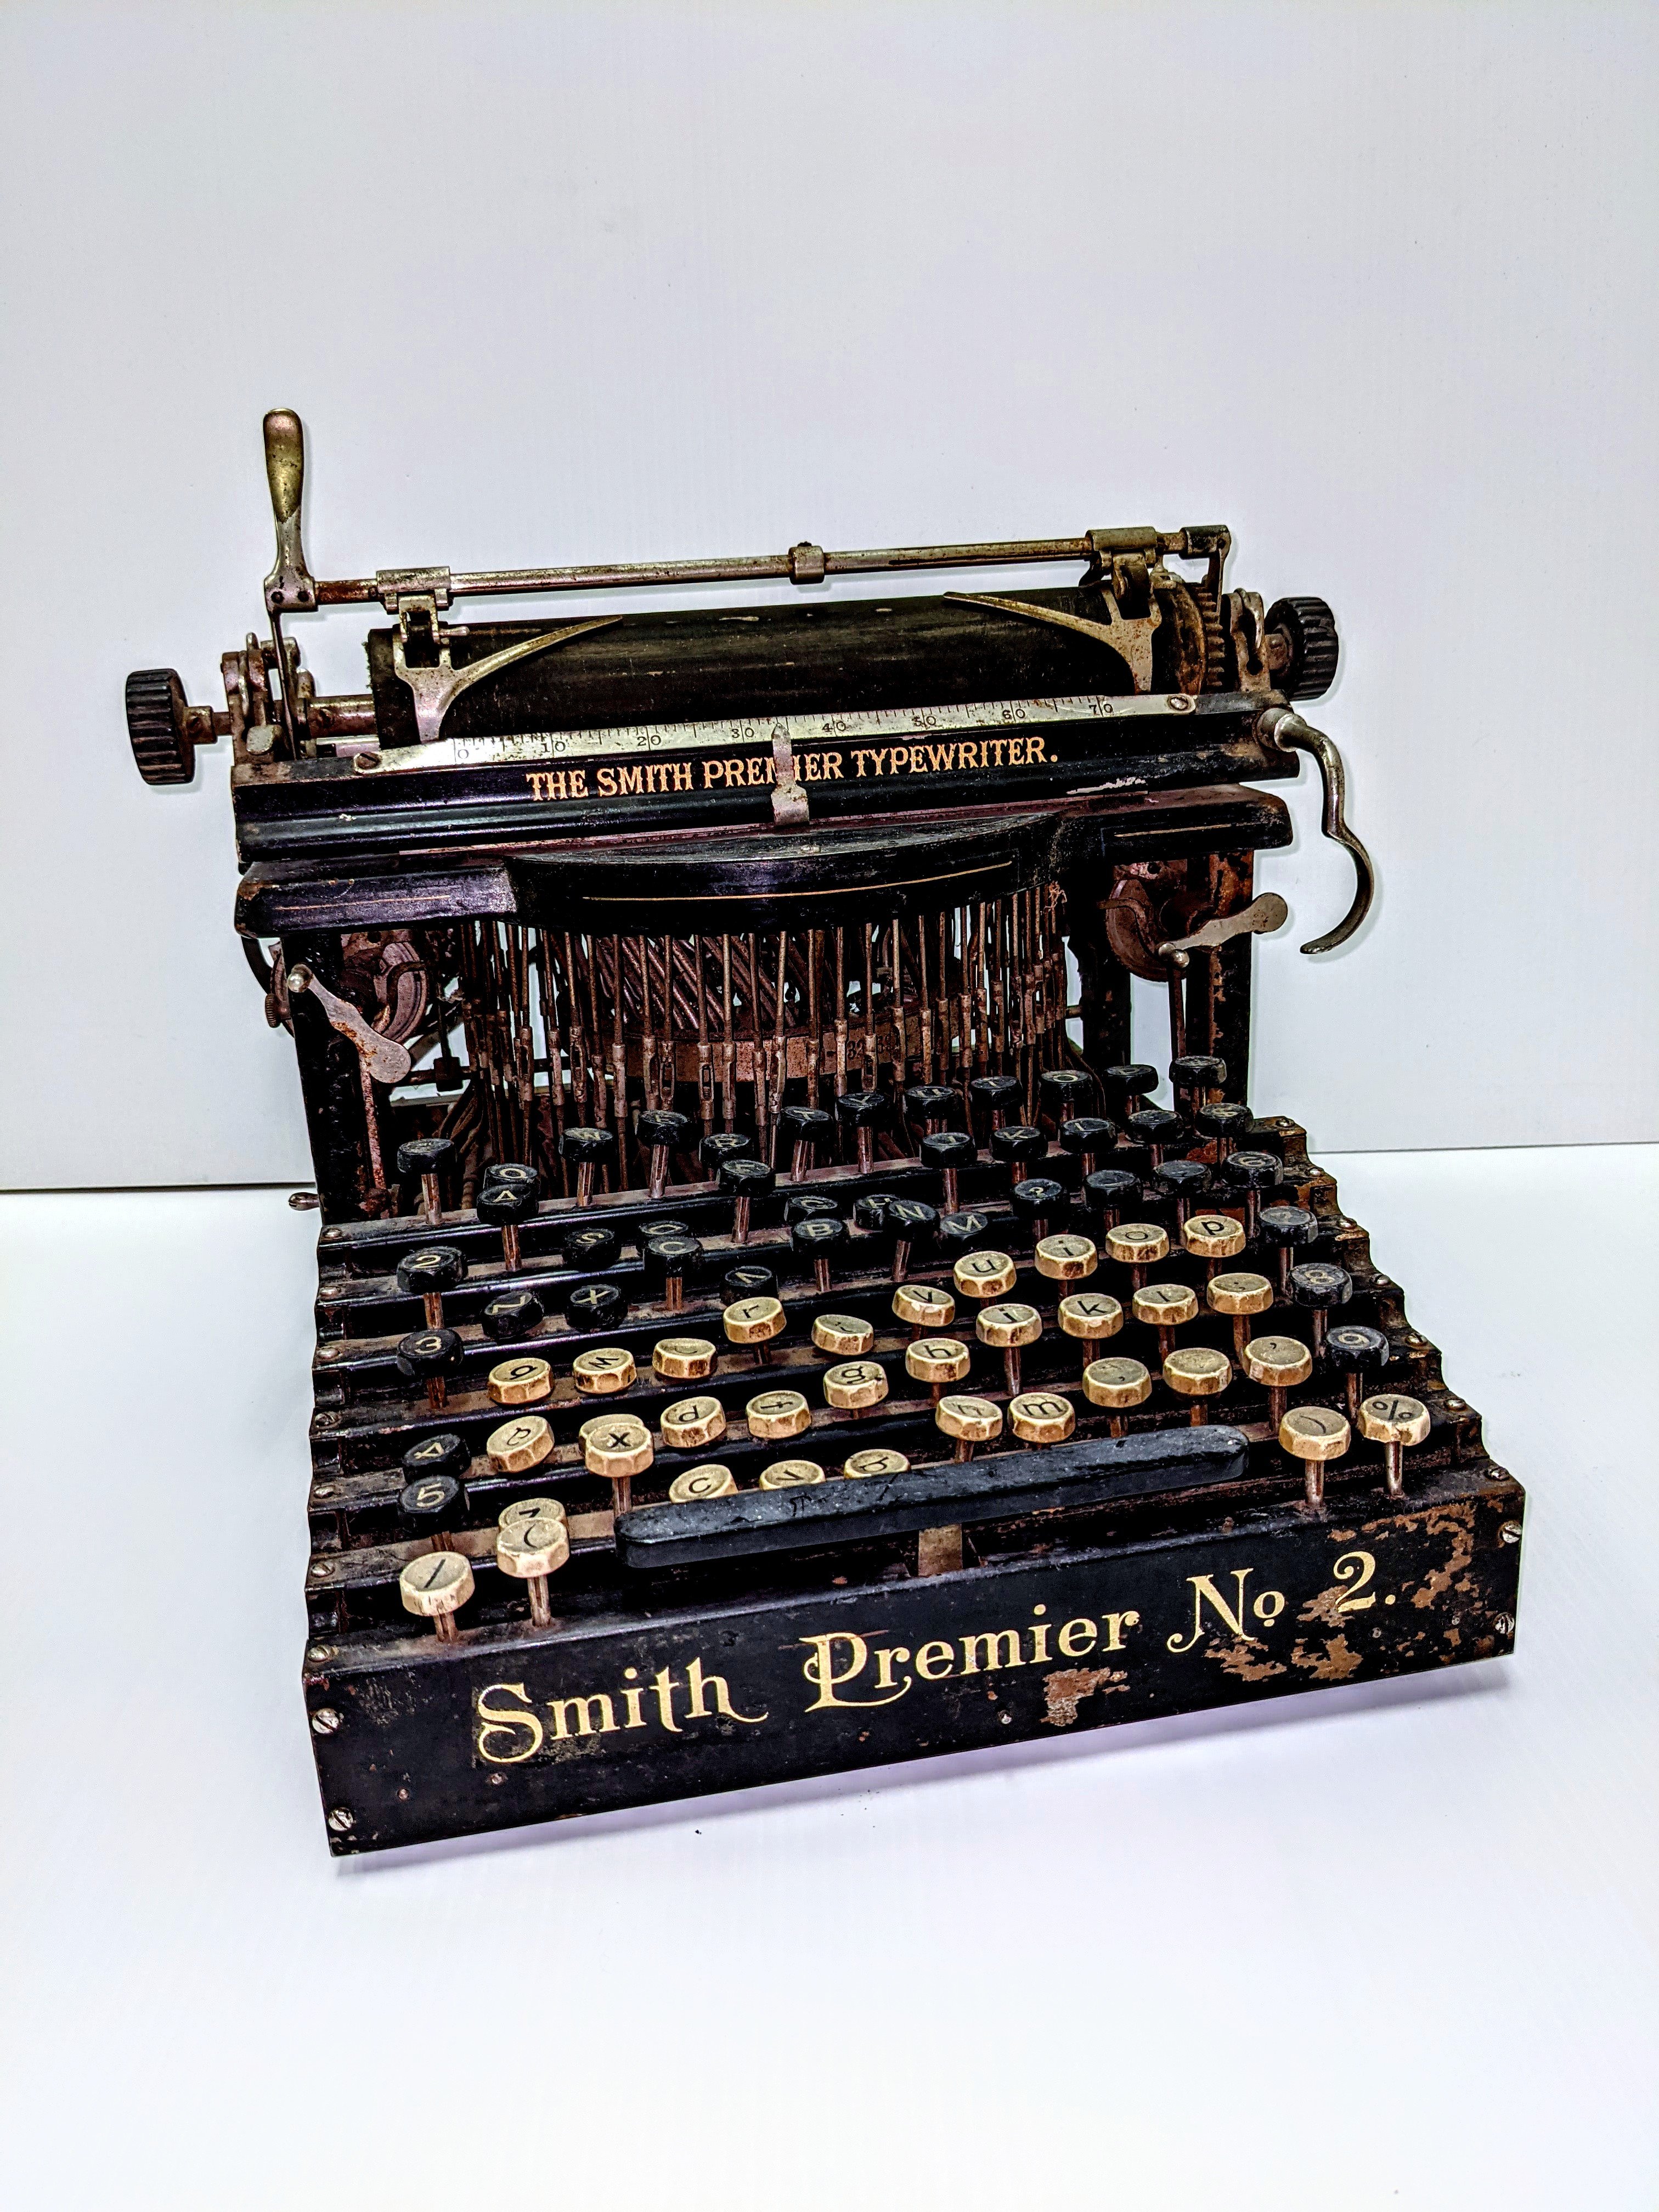 This Smith Premier No 2. Typewriter dates from 1904.  This typewriter has 2 full keyboard sets (one of upper case and one of lowercase) and uses an upstrike mechanism which makes it a 'Blindwriter'. Using this machine the typist cannot see what they are typing until they flip up the page roller mechanism. This differs from the 'modern' or 'visible' typewriter in which the typists sees what they are typing.

Another unique feature is the hand cranked cleaning brush for cleaning the typebars. 

15/03/2021
2004.03.04 / Twidale, John & Alfa